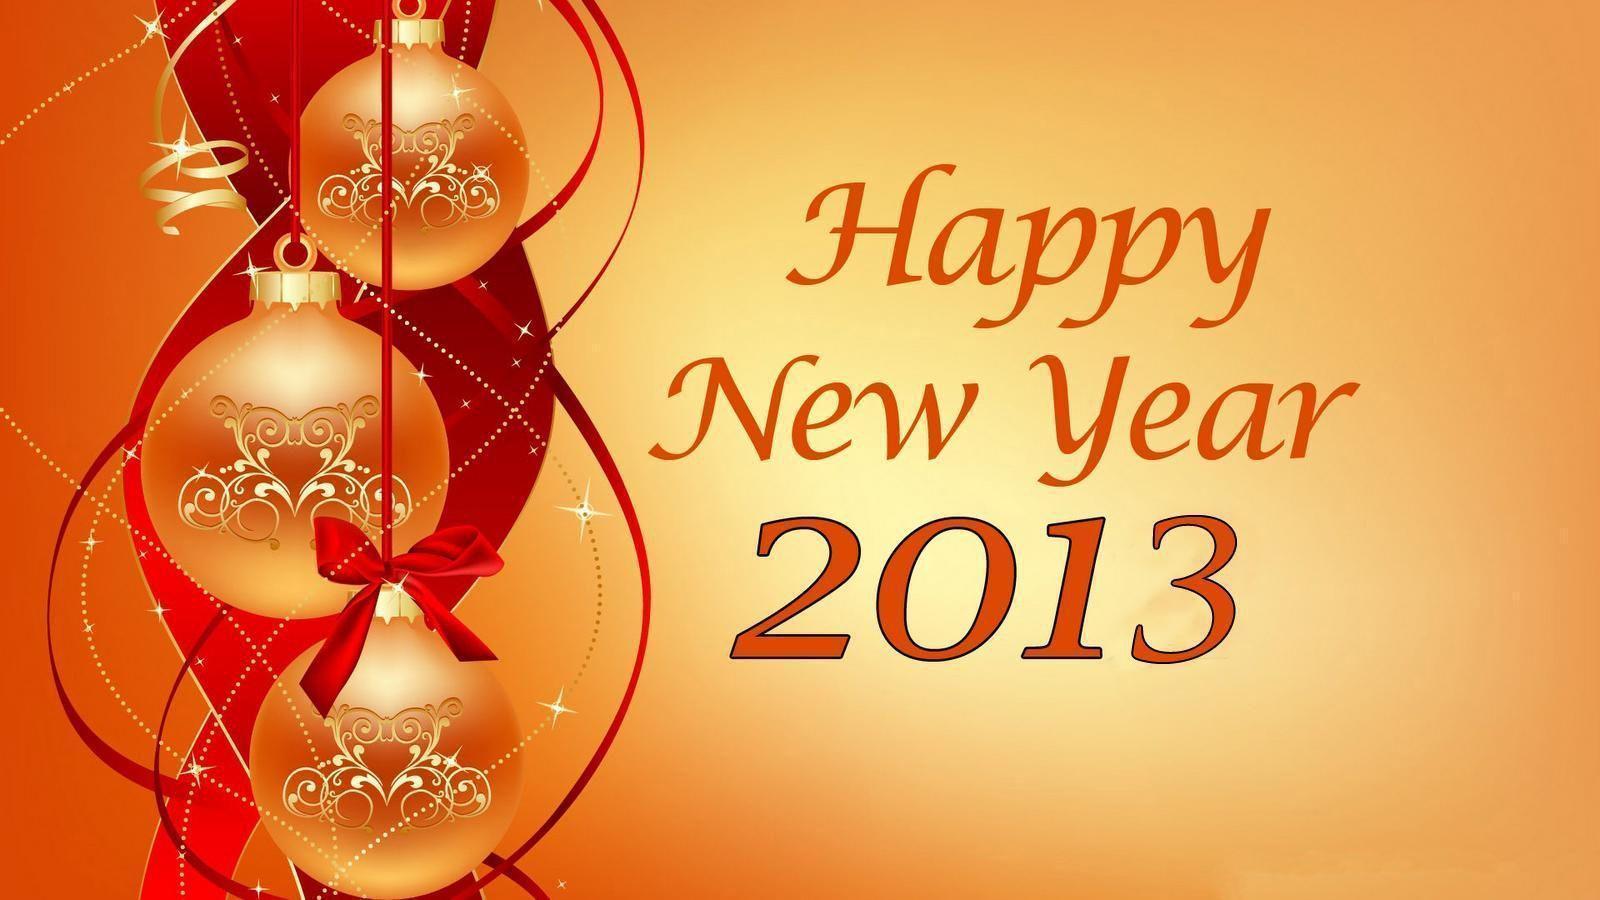 happy new year 2013 wallpaper free download